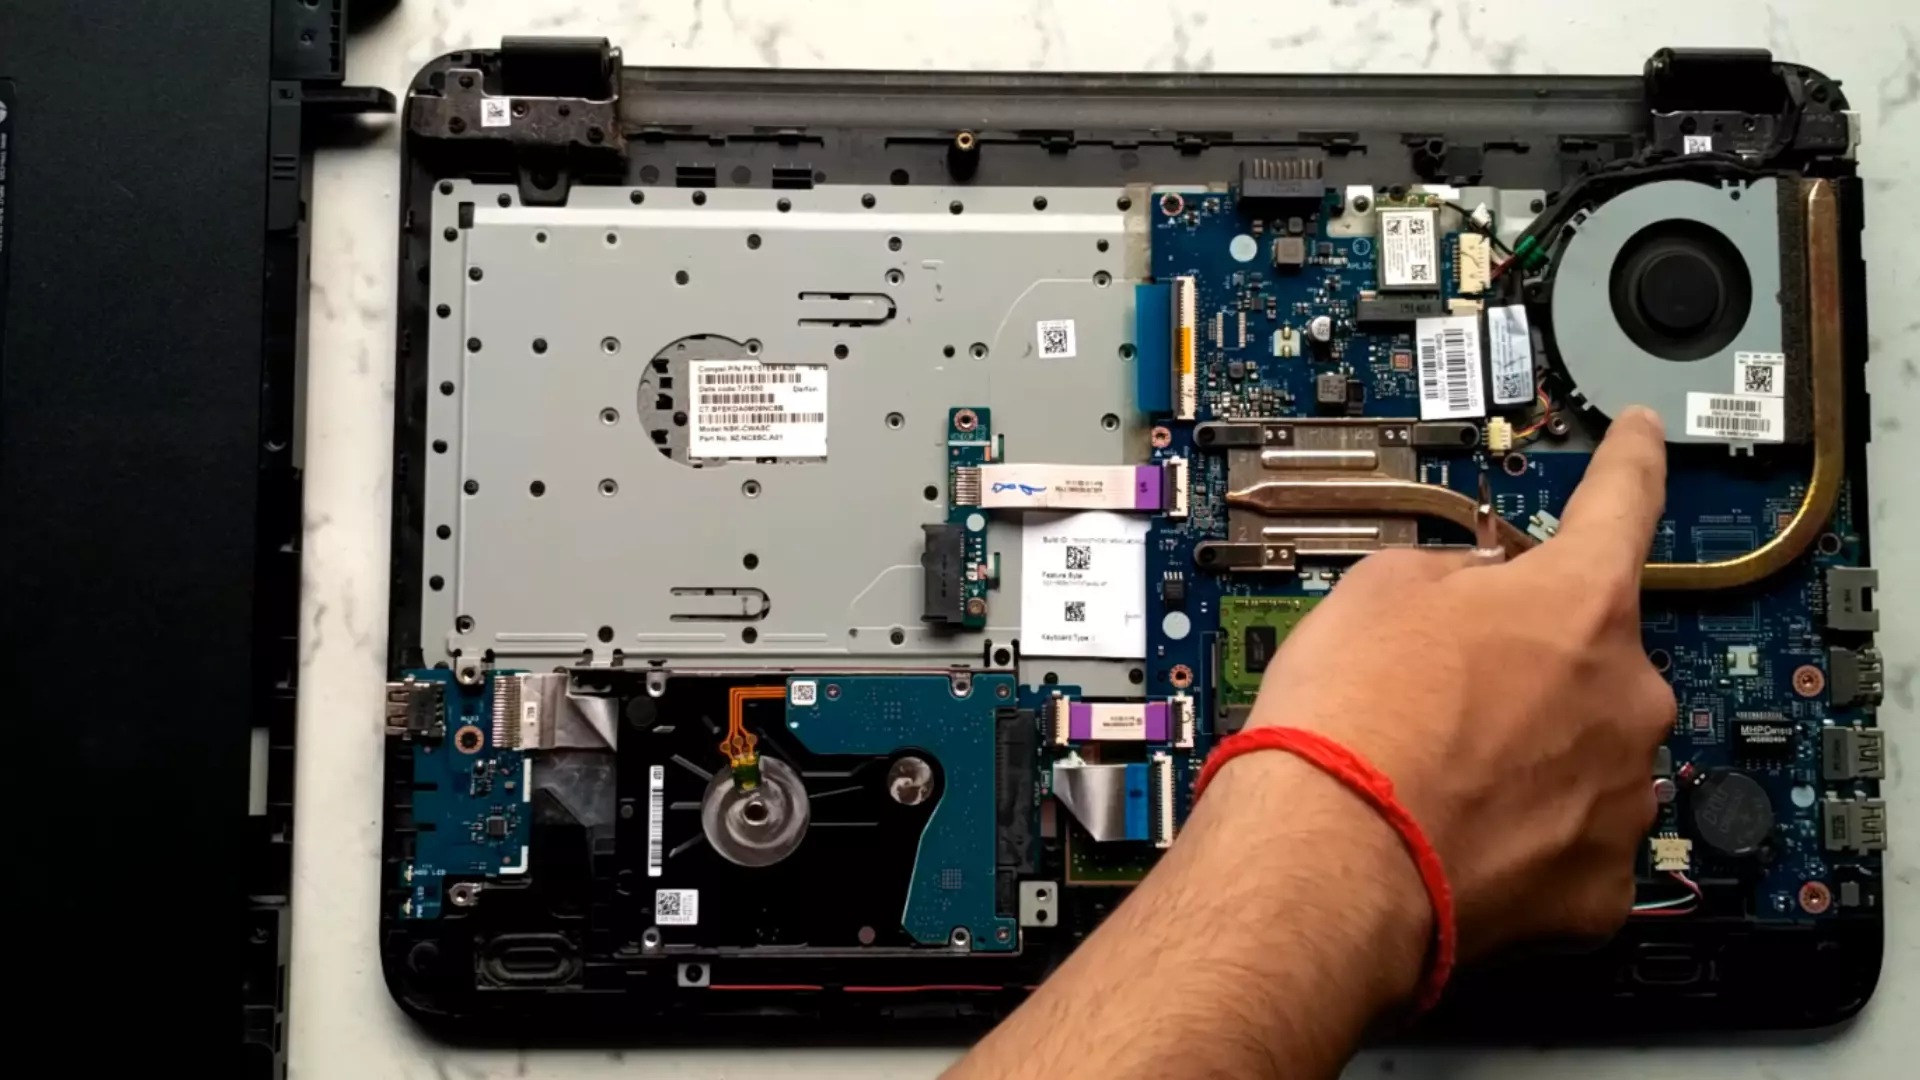 What is the function of the fans inside the Laptop